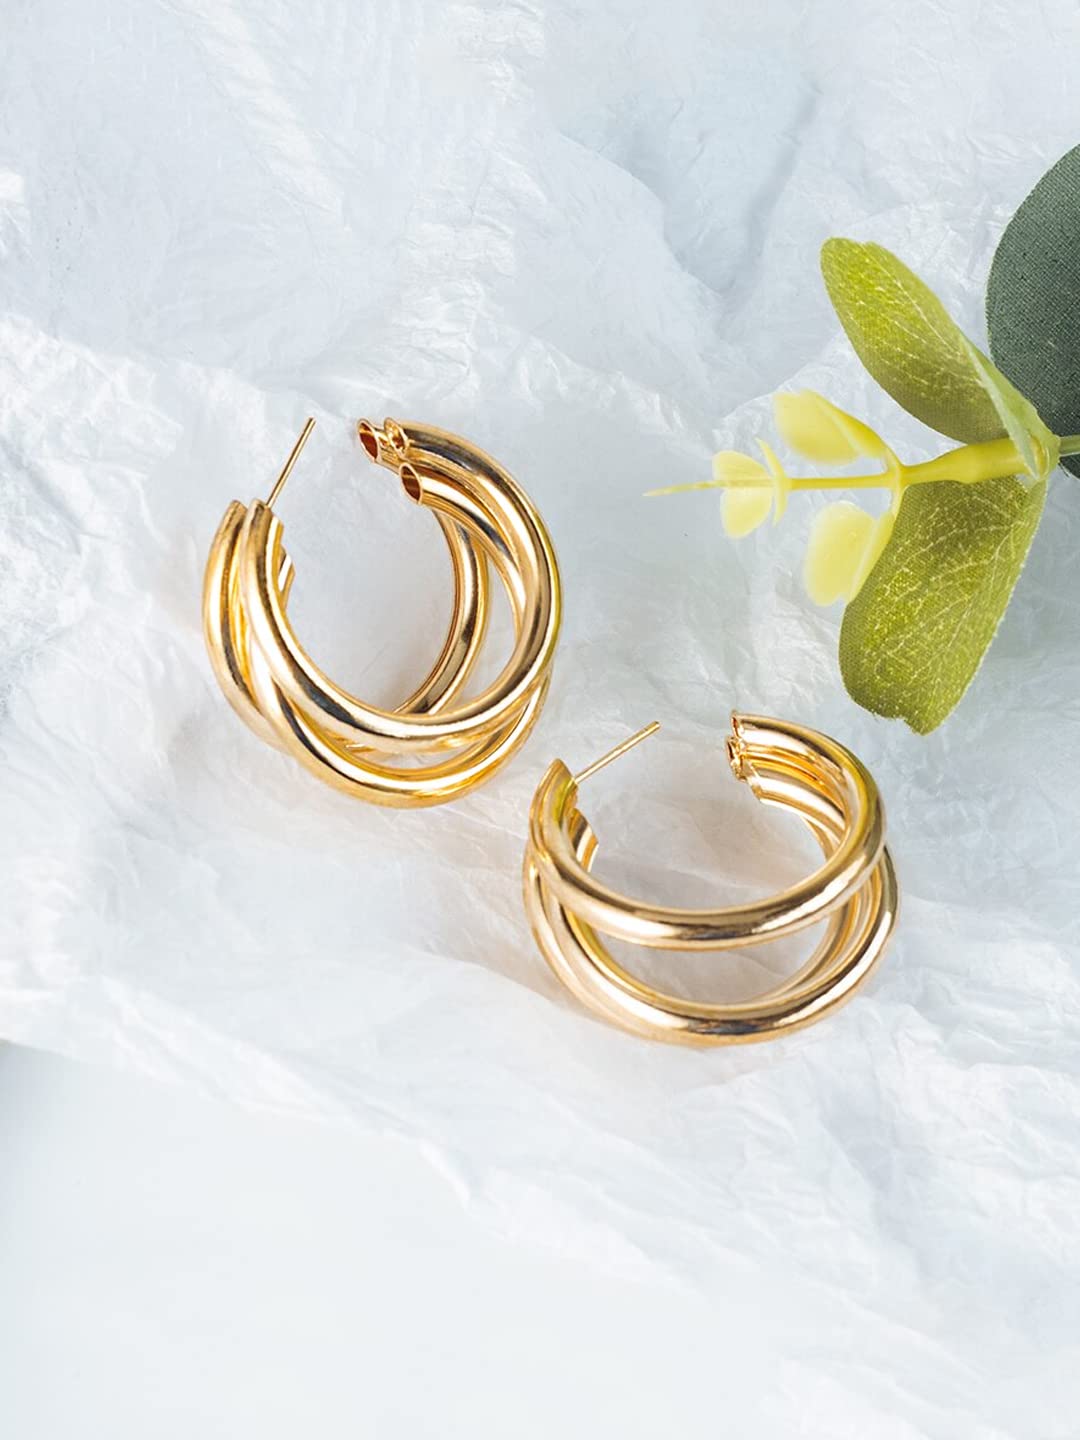 Yellow Chimes Earrings for Women and Girls Golden Hoops Earrings | Gold Plated Layered Hoop Earrings for Women | Birthday Gift for girls and women Anniversary Gift for Wife